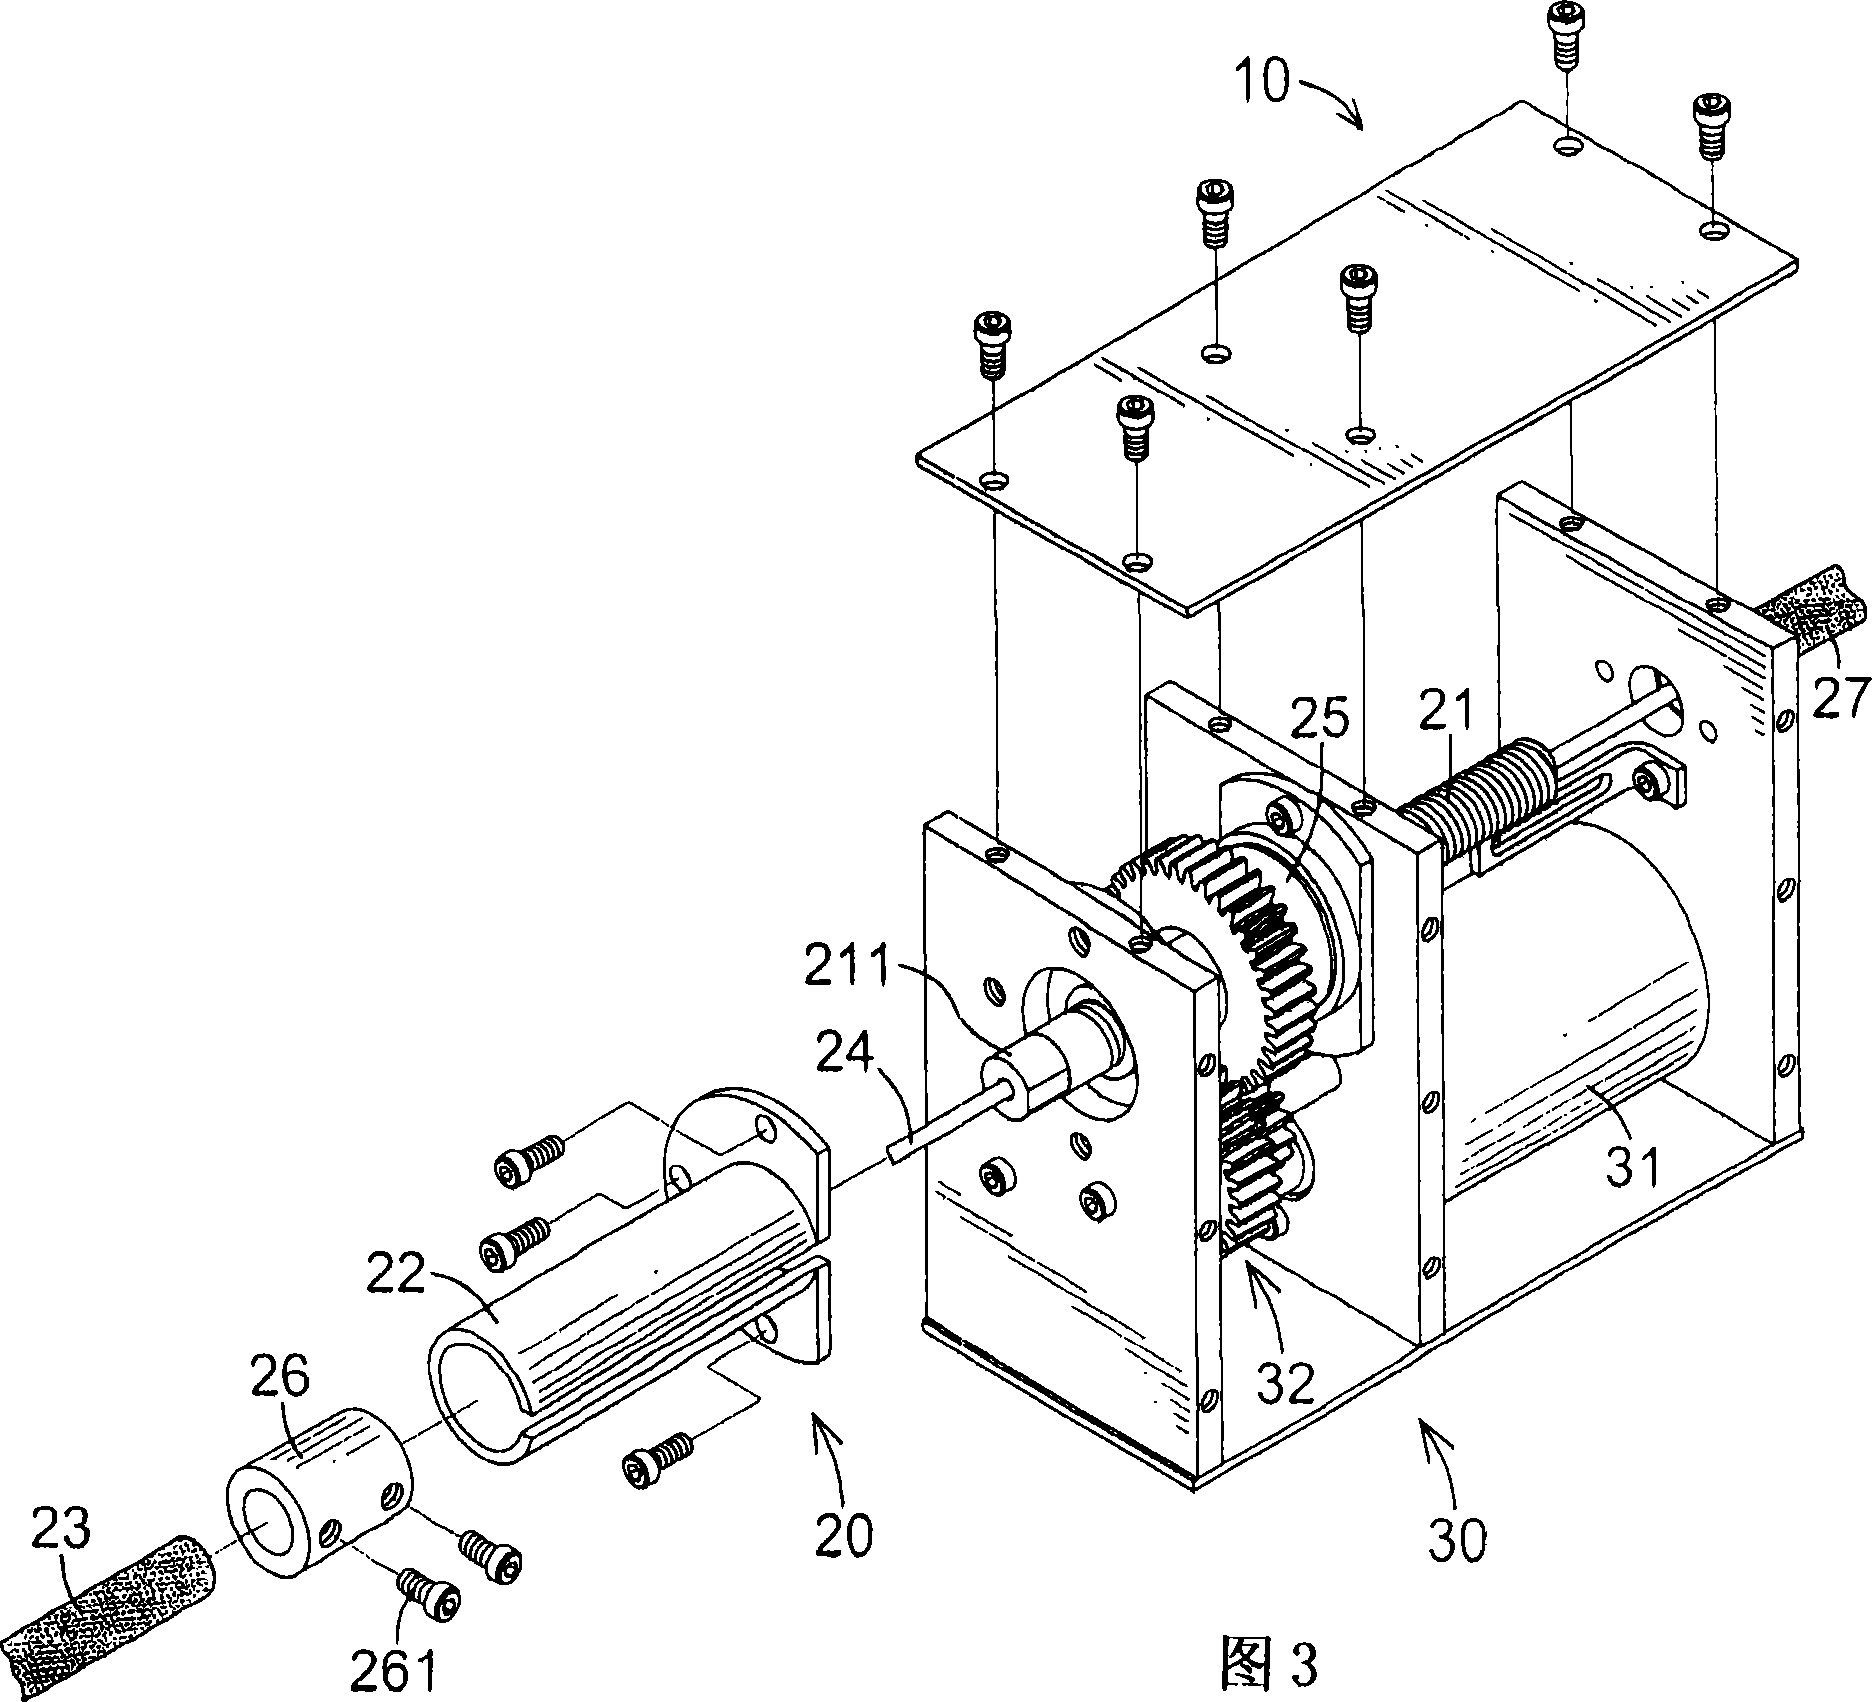 Driving device for parking system